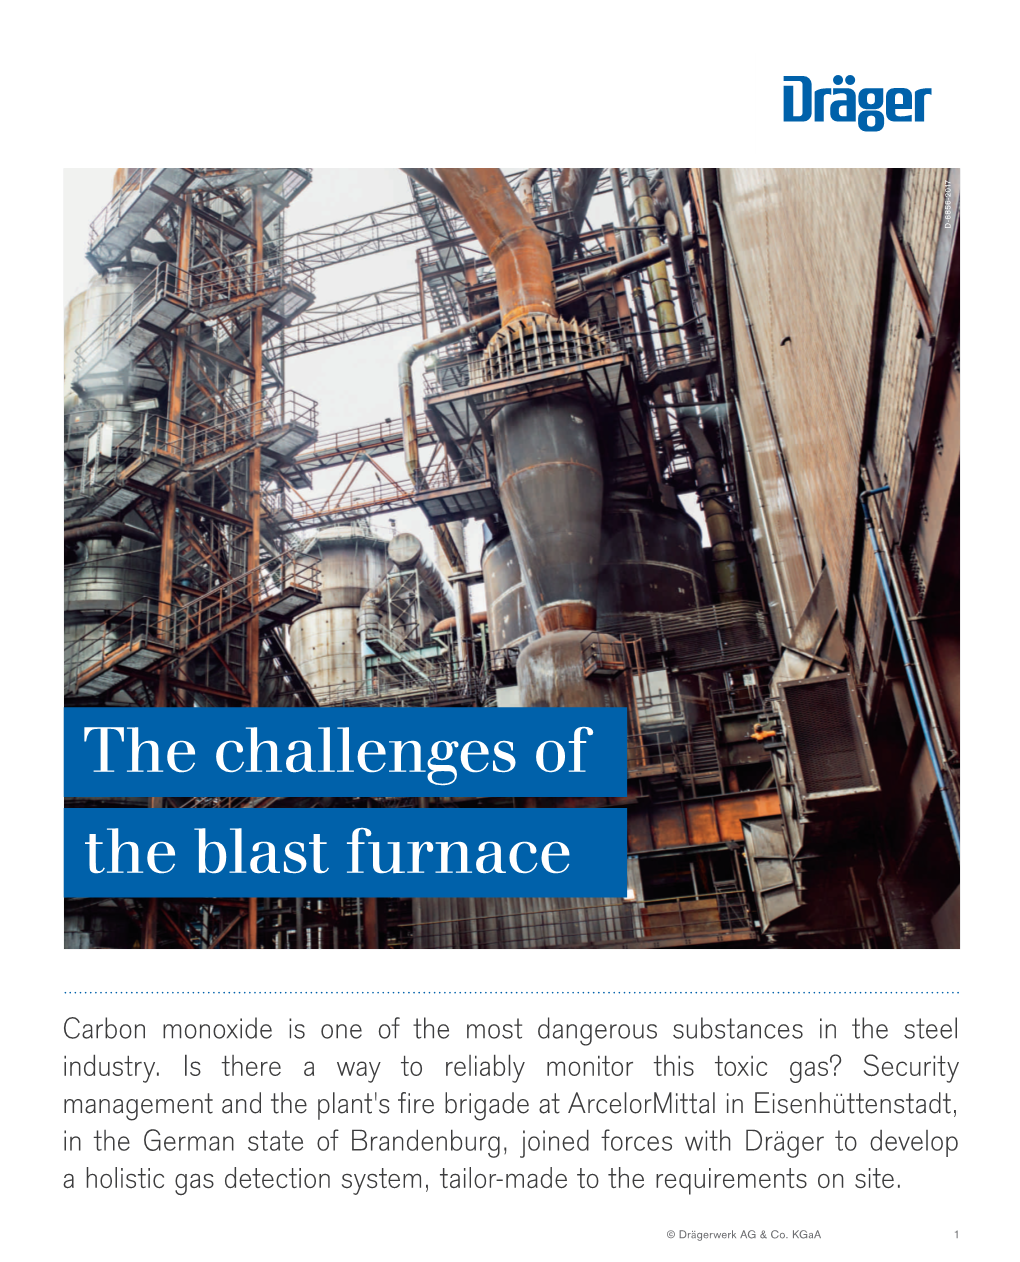 The Challenges of the Blast Furnace